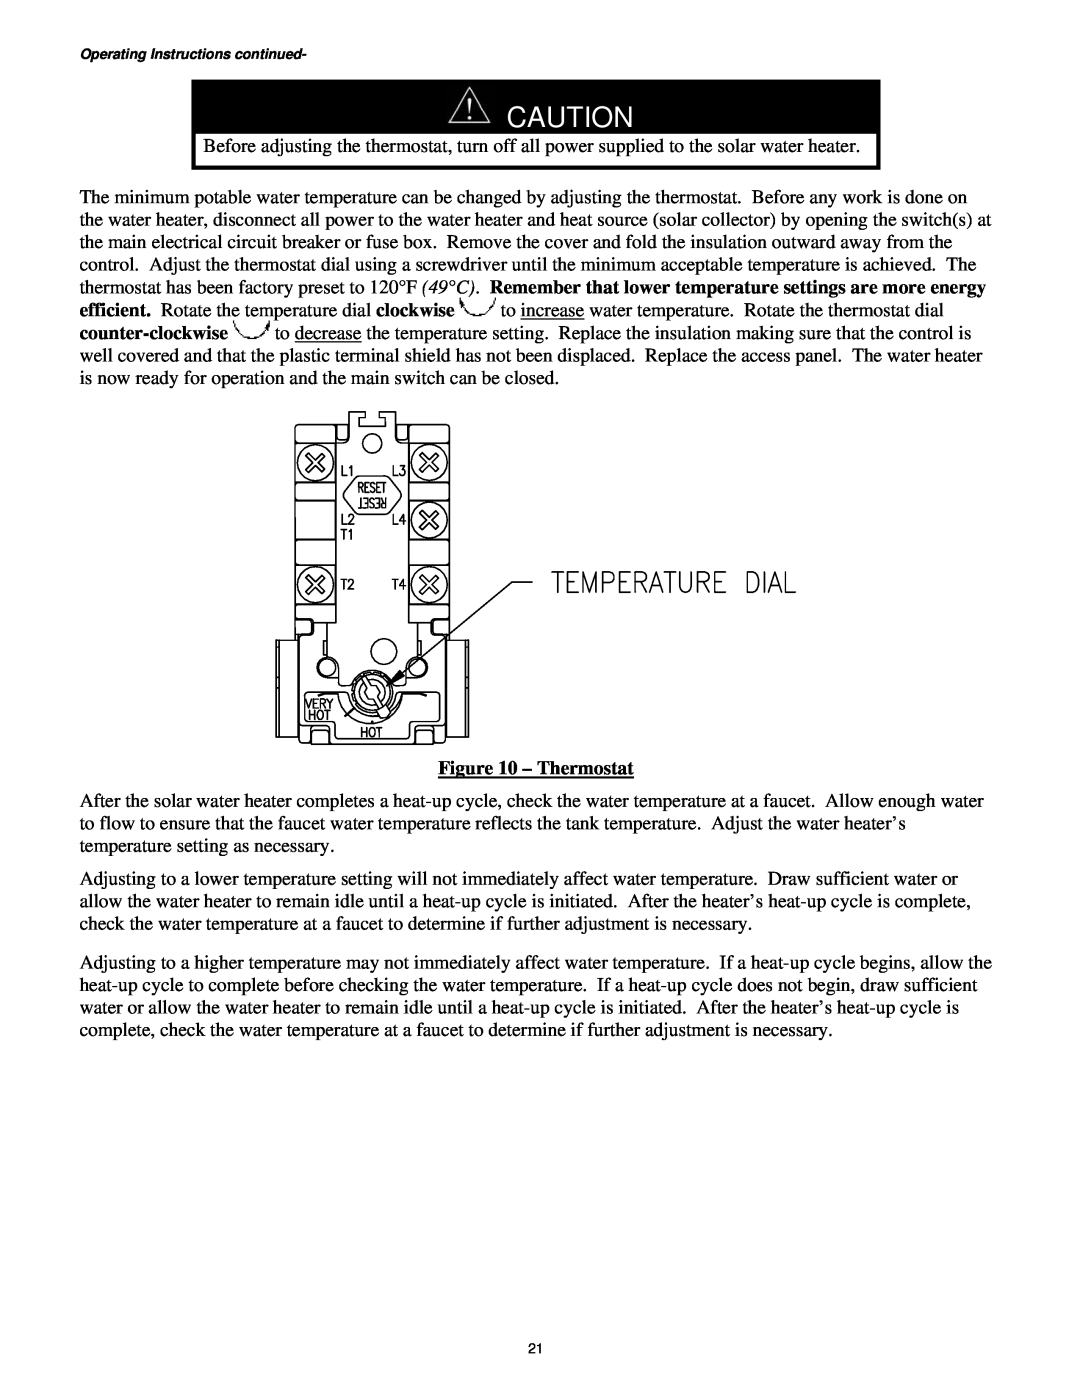 Bradford-White Corp Solar Water Heater manual Thermostat, Operating Instructions continued 